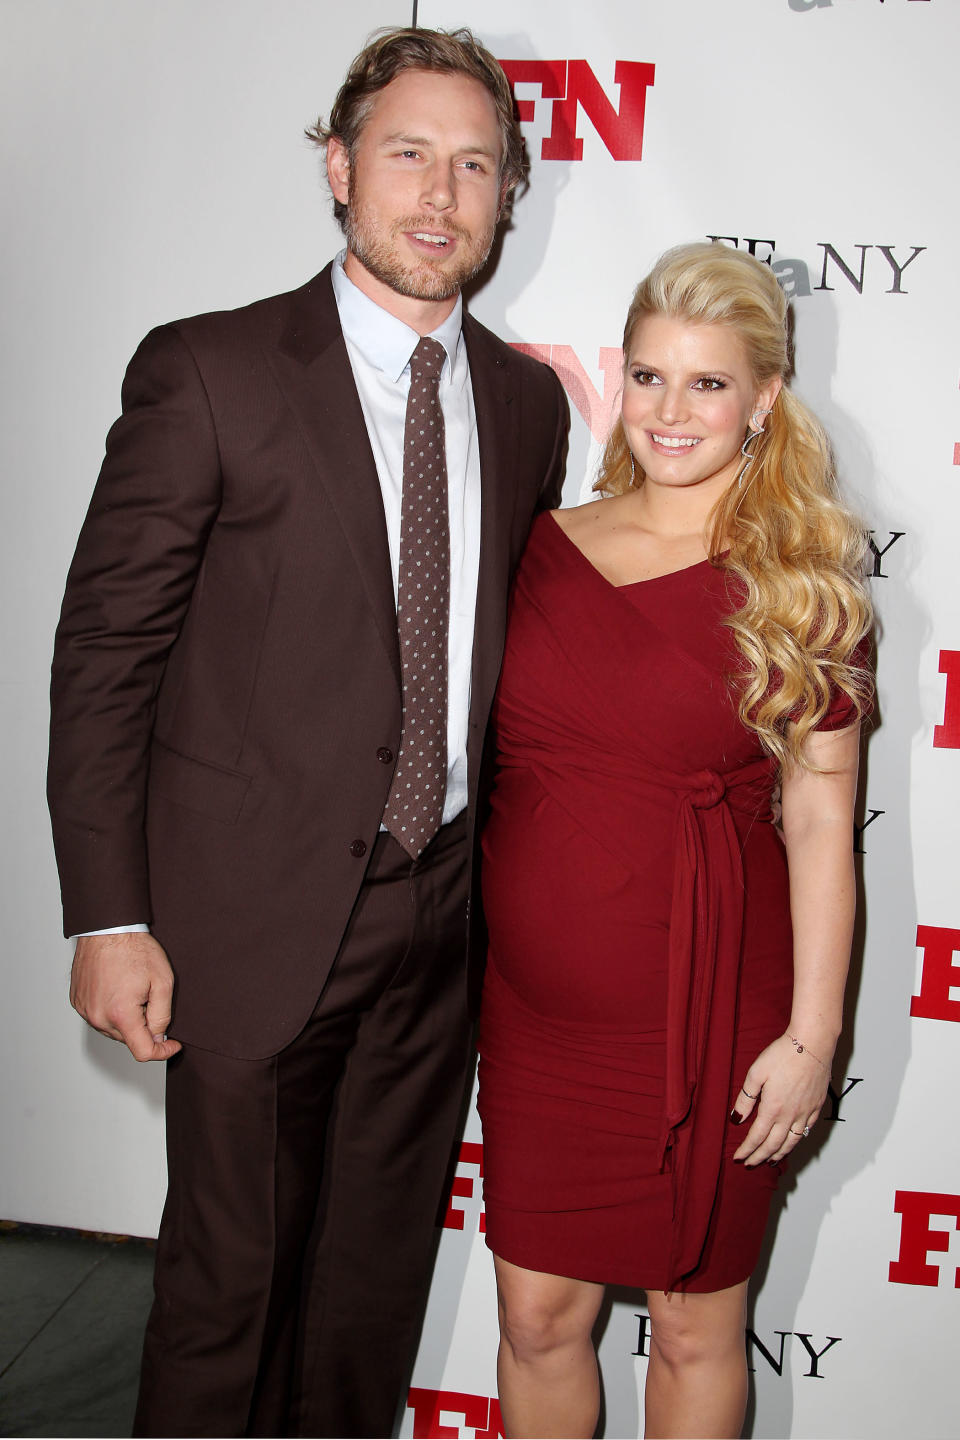 FILE - In this Nov. 29, 2011 file photo, singer Jessica Simpson, right, poses with Eric Johnson at the 25th Annual Footwear News Achievement Awards at The Museum of Modern Art in New York. Simpson's rep confirmed that the entertainer gave birth to Ace Knute in Los Angeles on Sunday, June 30, 2013, via planned C-section. This is the second child for Simpson and her fiance, Eric Johnson. Simpson gave birth to daughter Maxwell last year. (AP Photo/Starpix, Amanda Schwab, file)